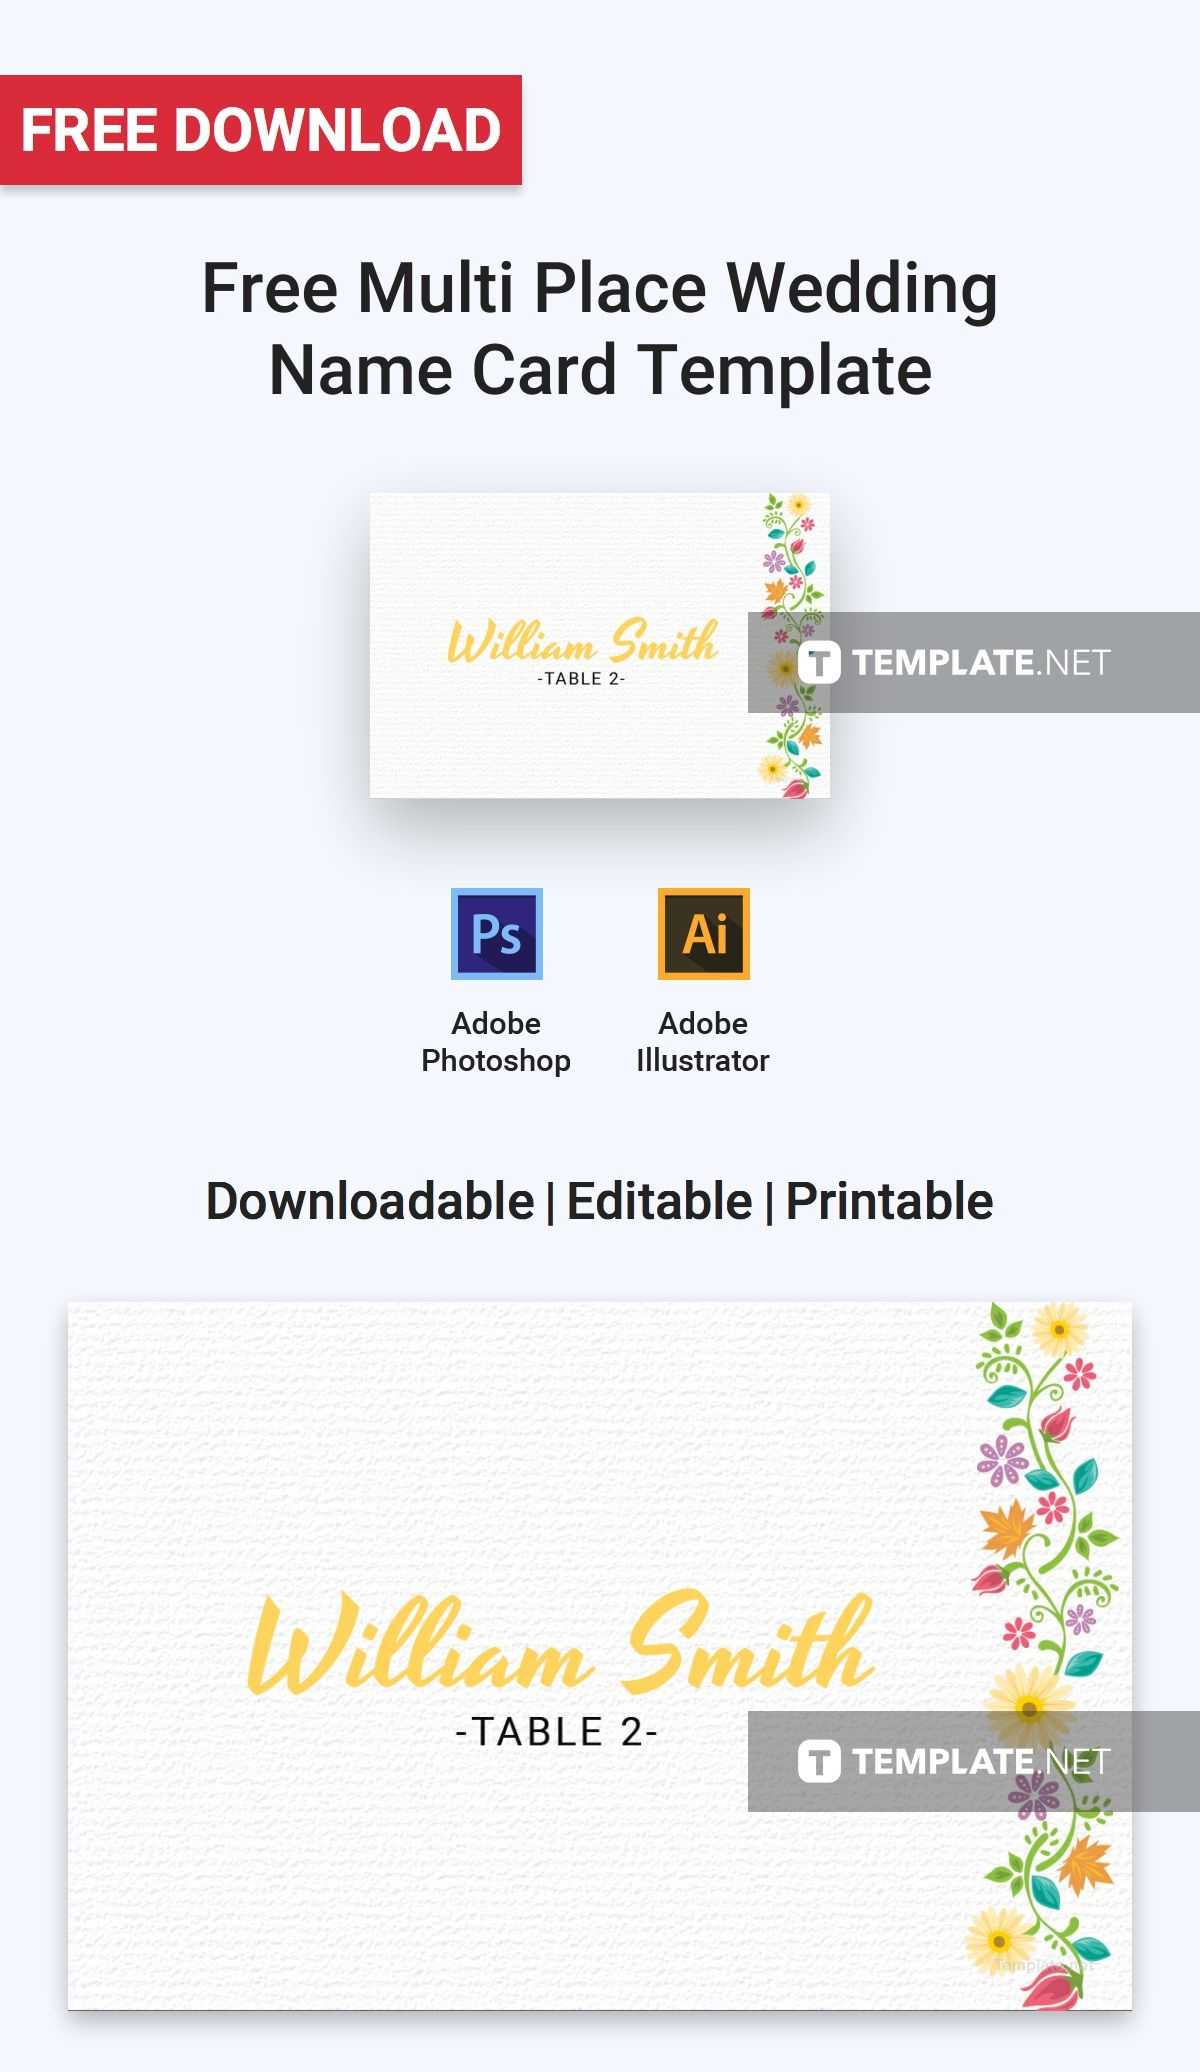 Free Multi Place Wedding Name Card | Card Templates With Table Name Cards Template Free